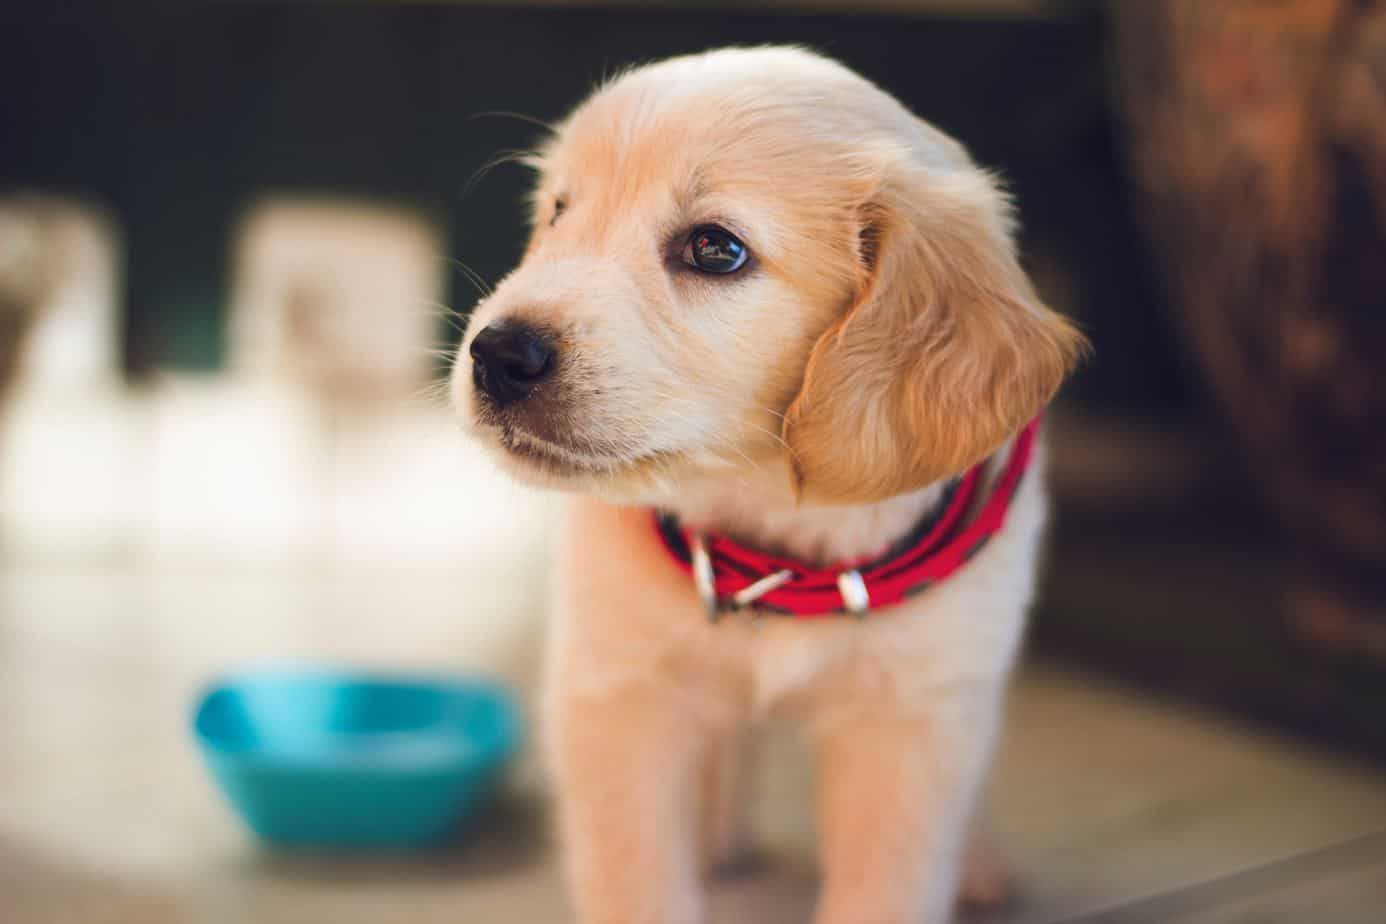 What Training Treats Are Best for a Puppy?